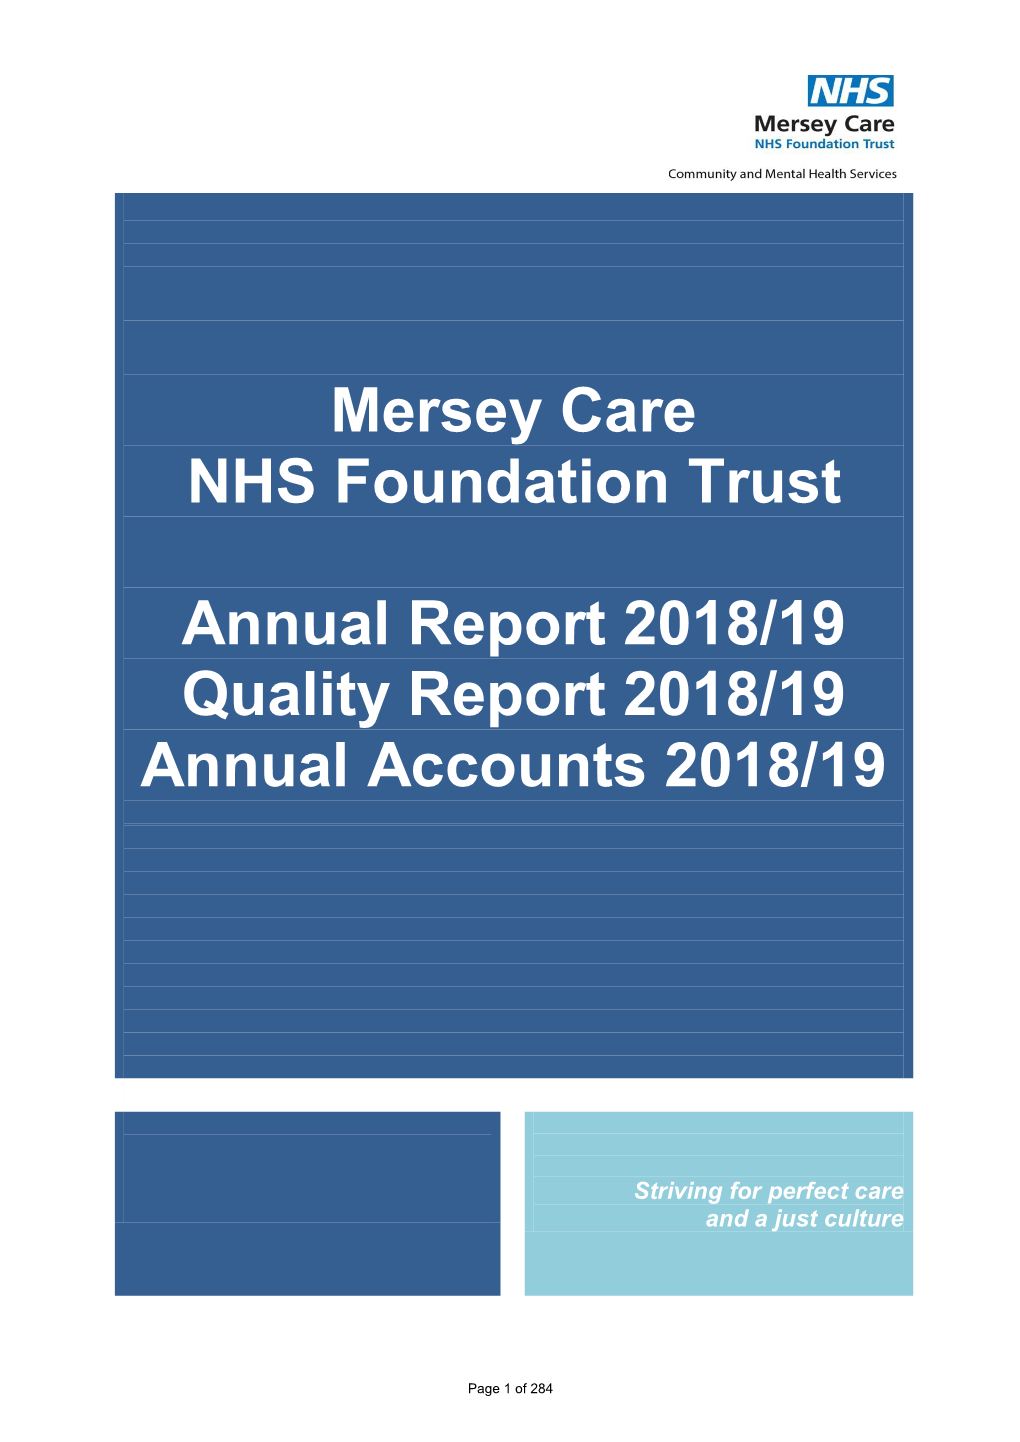 Mersey Care NHS Foundation Trust: Annual Report and Accounts 2018/19